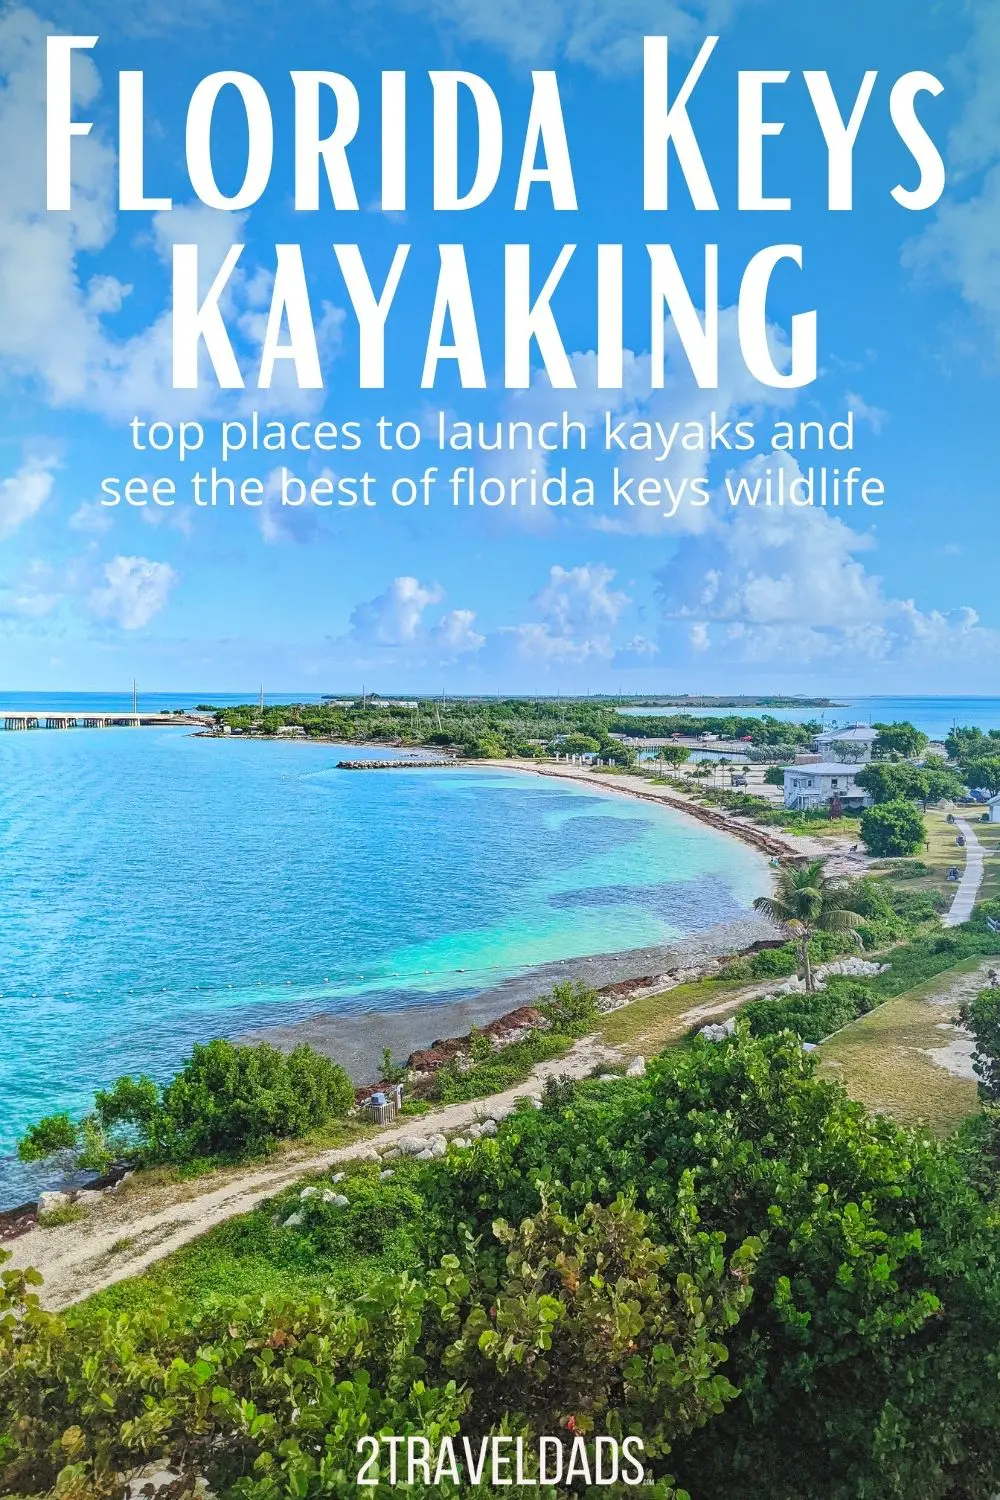 The best places to kayak in the Florida Keys range from Key West to the backcountry of the smaller keys. Kayaking routes and guided tours in the Florida Keys to make a road trip on the Overseas Highway even better.